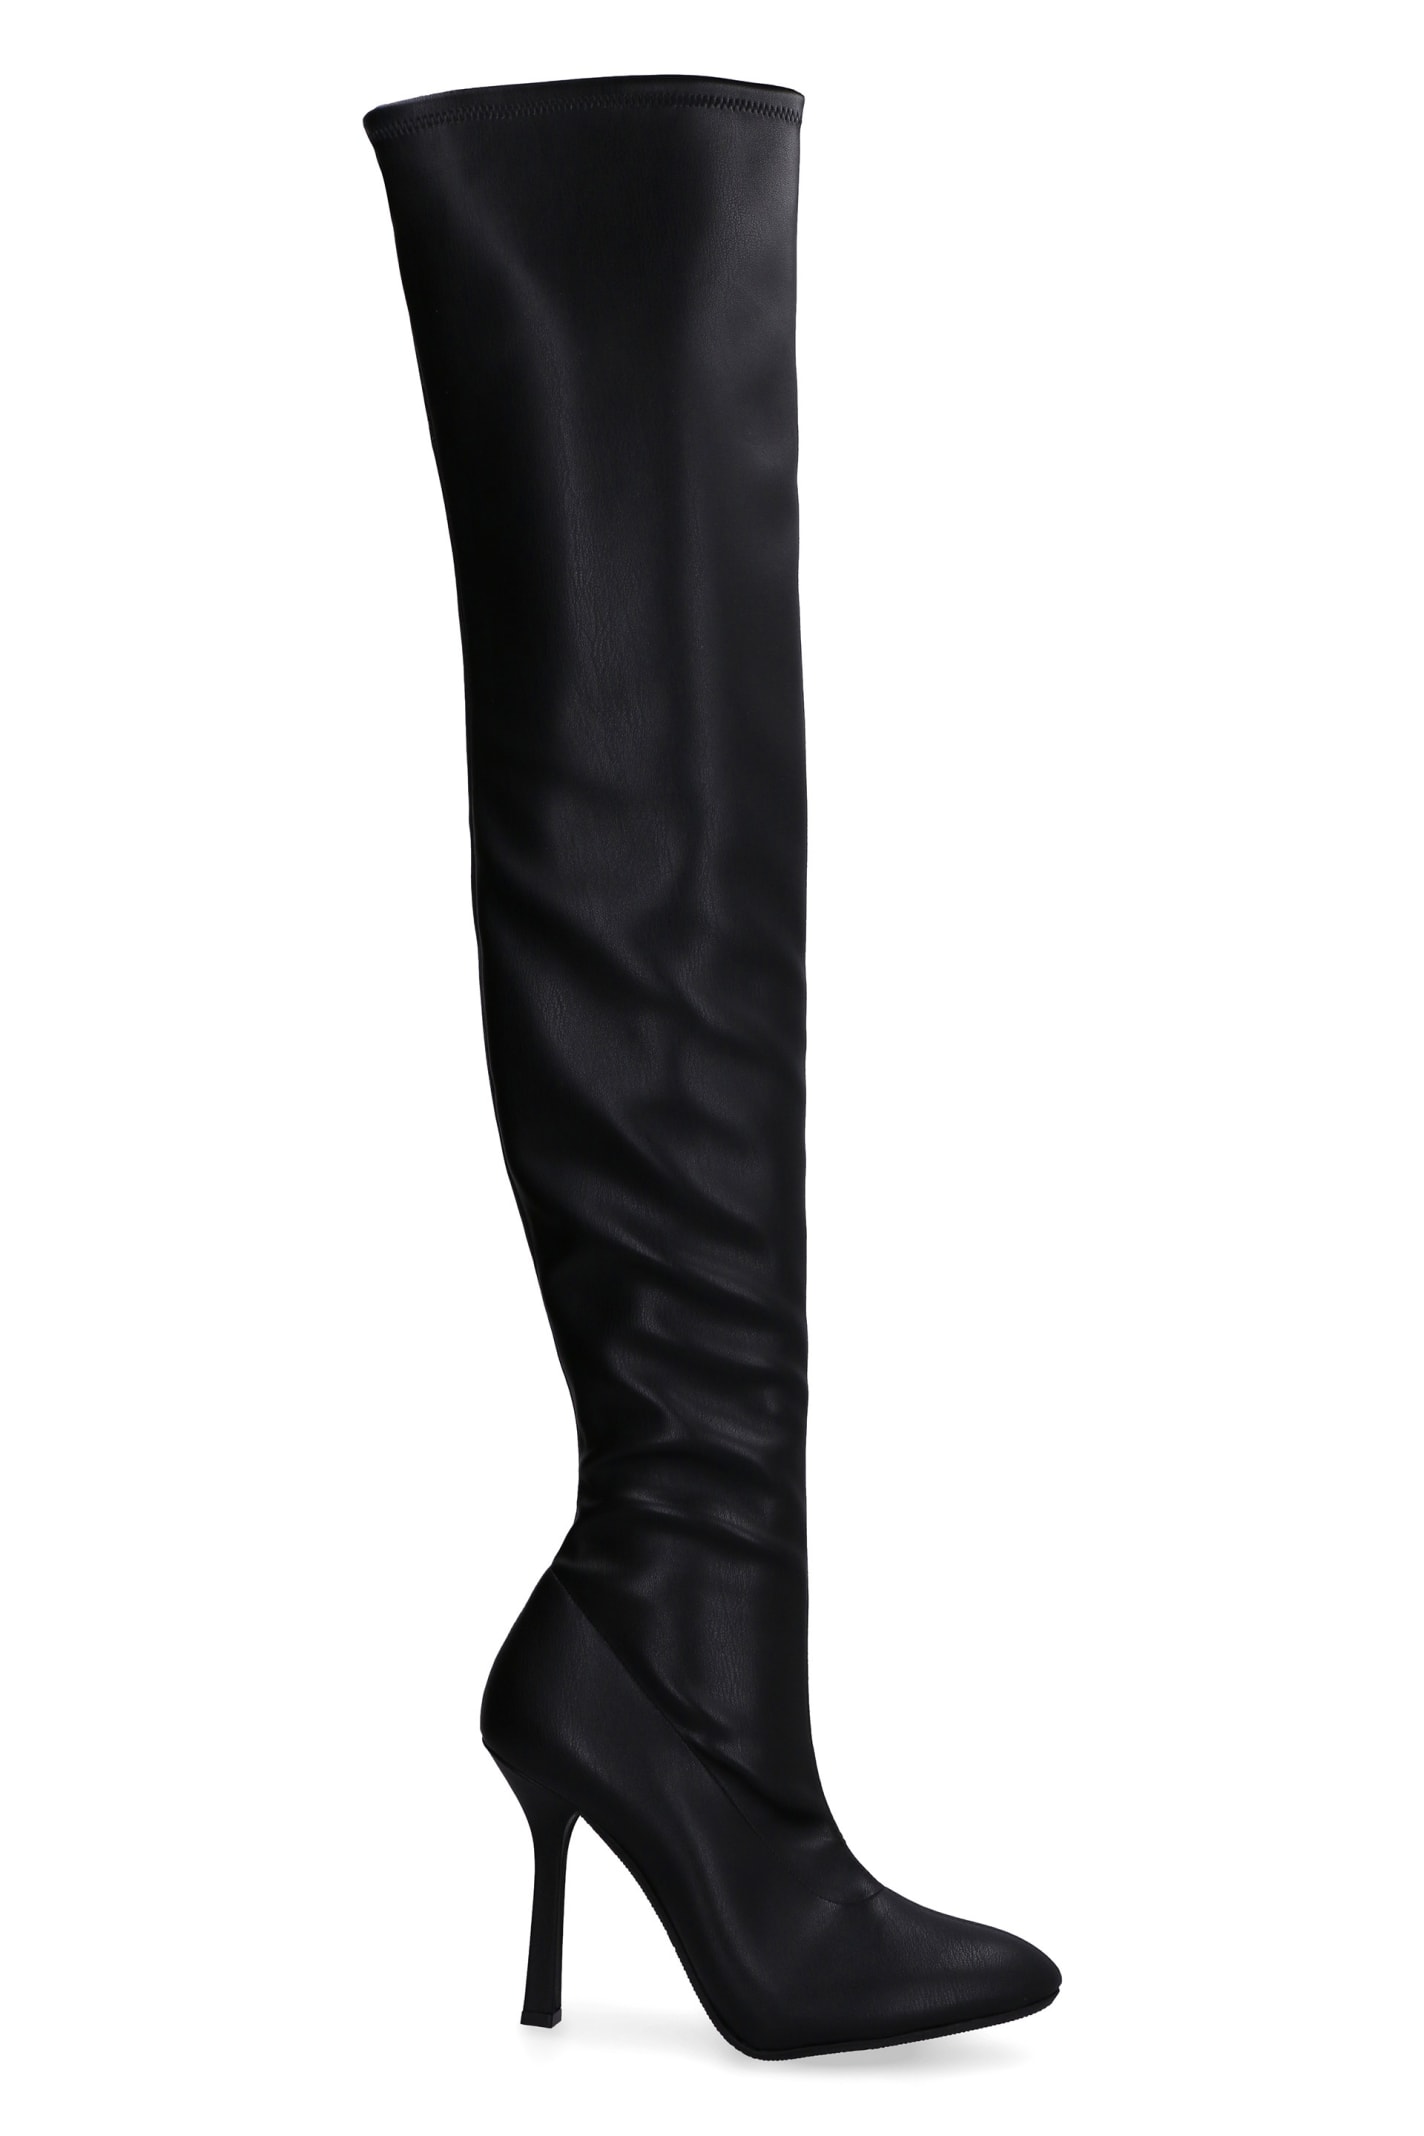 CASADEI OVER-THE-KNEE BOOT